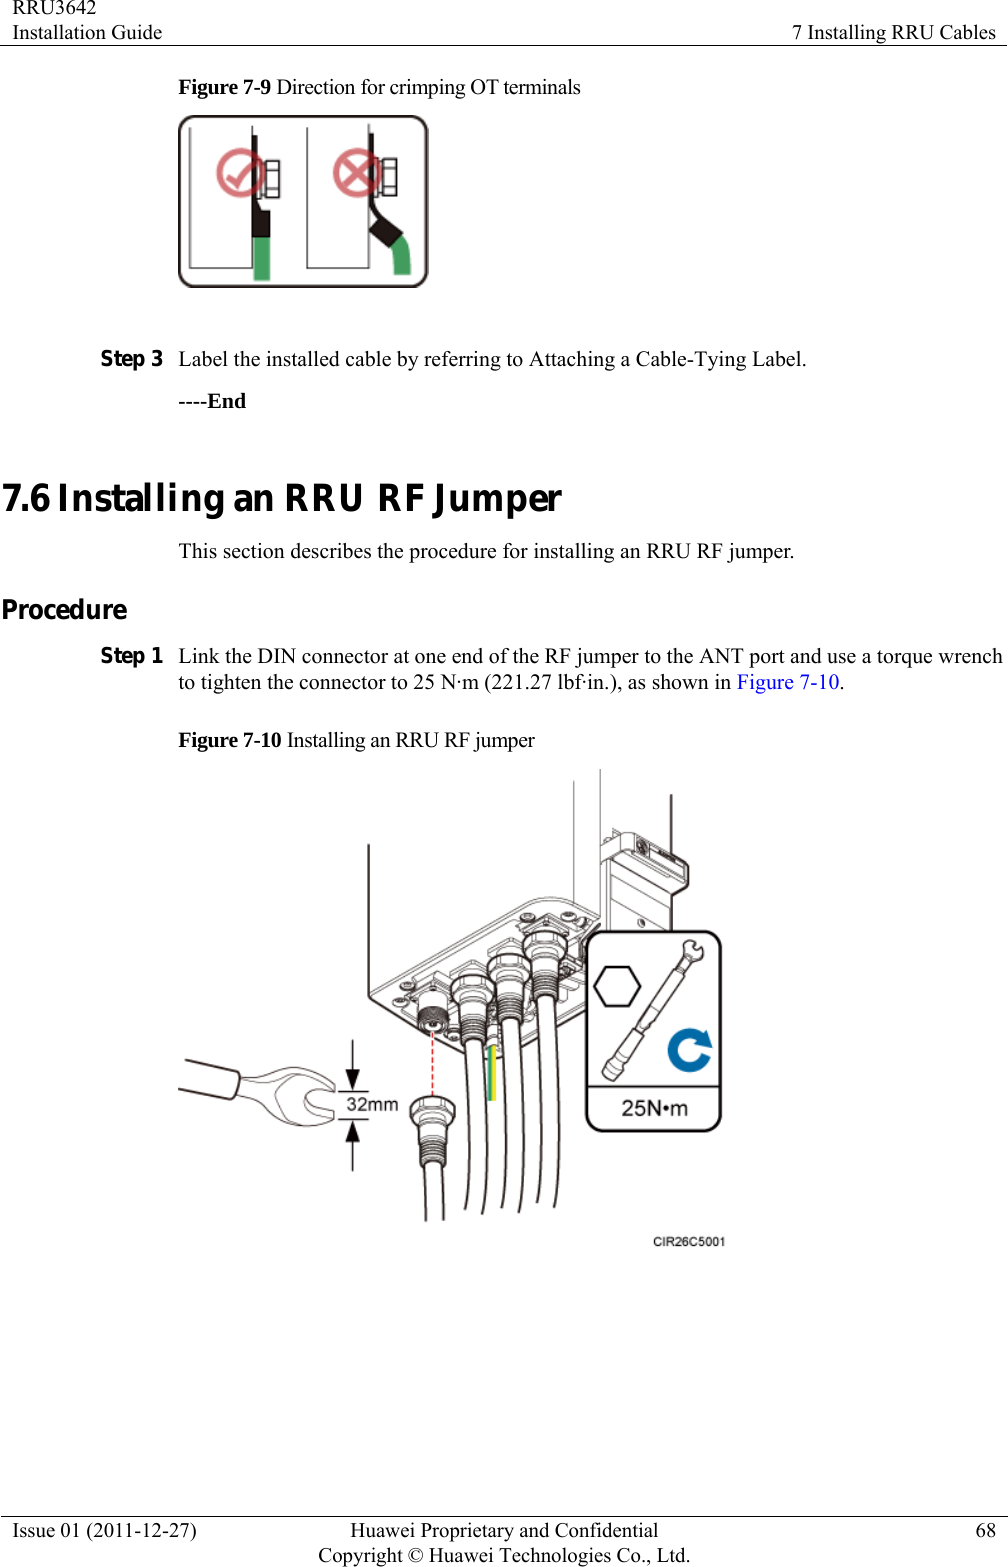 RRU3642 Installation Guide  7 Installing RRU Cables Issue 01 (2011-12-27)  Huawei Proprietary and Confidential         Copyright © Huawei Technologies Co., Ltd.68 Figure 7-9 Direction for crimping OT terminals   Step 3 Label the installed cable by referring to Attaching a Cable-Tying Label. ----End 7.6 Installing an RRU RF Jumper This section describes the procedure for installing an RRU RF jumper. Procedure Step 1 Link the DIN connector at one end of the RF jumper to the ANT port and use a torque wrench to tighten the connector to 25 N·m (221.27 lbf·in.), as shown in Figure 7-10. Figure 7-10 Installing an RRU RF jumper    